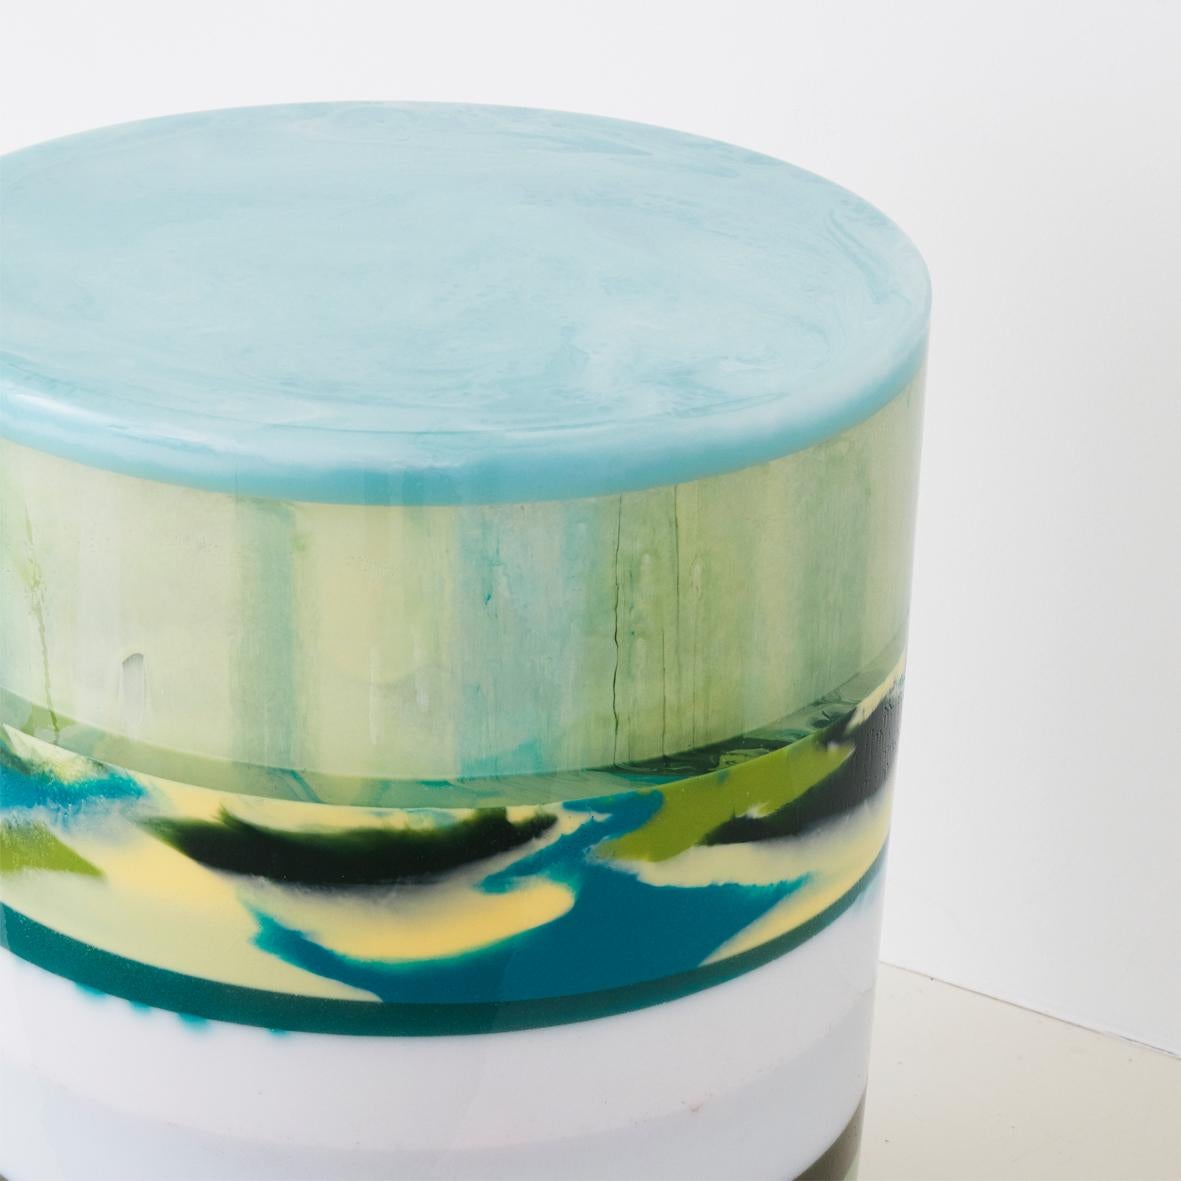 Cleverclaire (Heekyung Sul) is a designer based in South Korea who create product(furniture) using colorful resin. She cites color as being vital to her artistic approach and process. Utilizing the fluidity and transparency of resin, her pieces